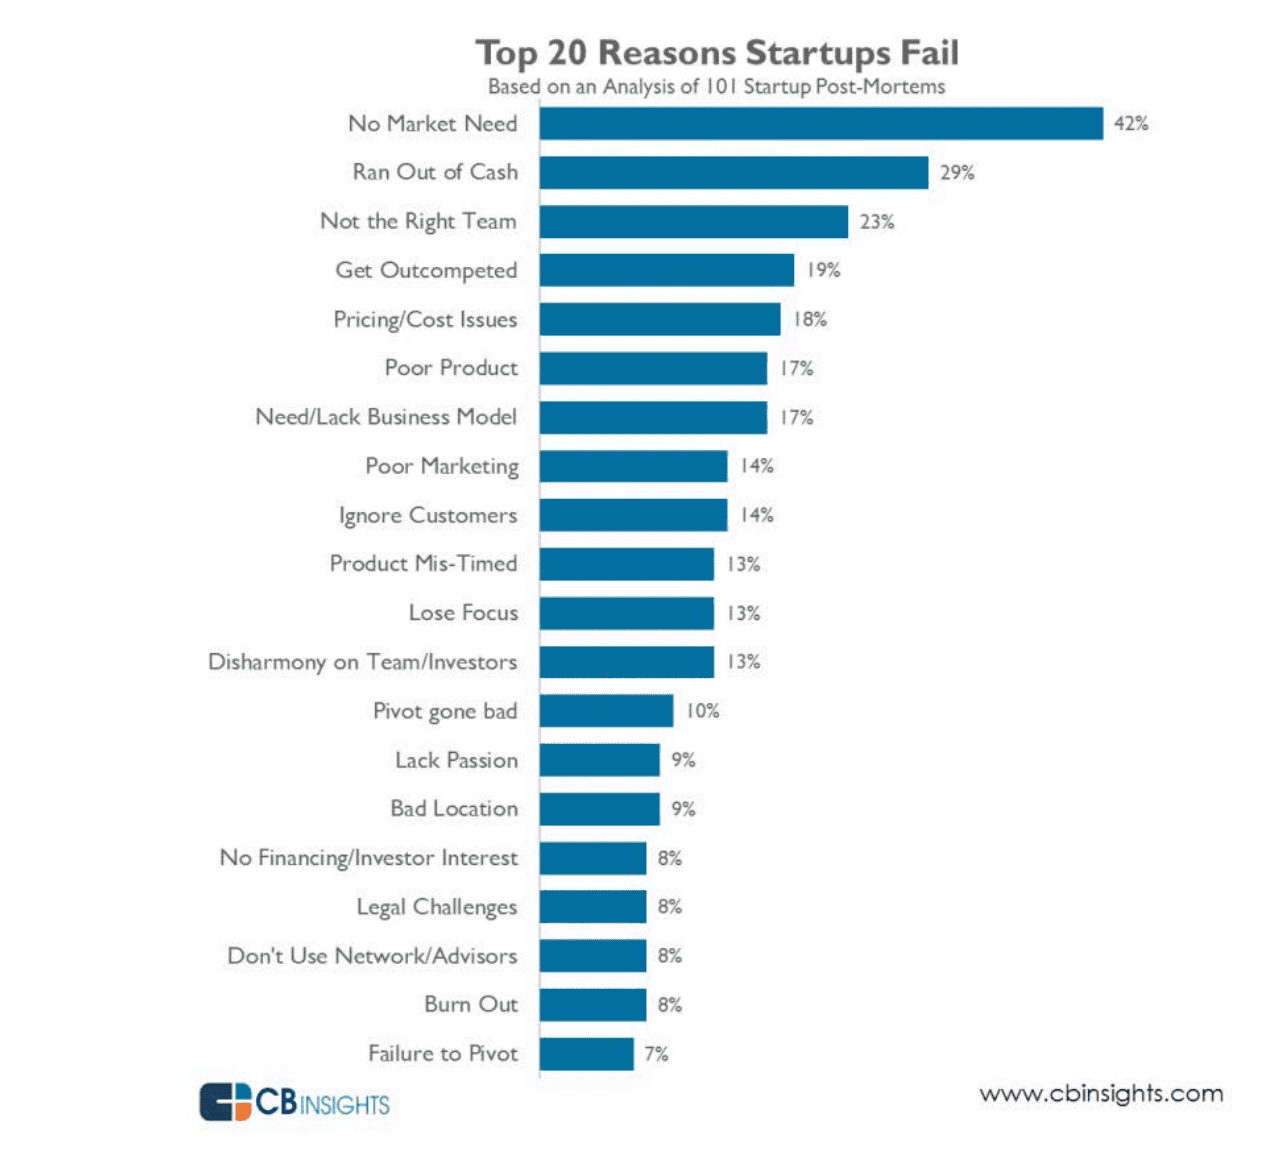 The top 20 reasons why startups fail